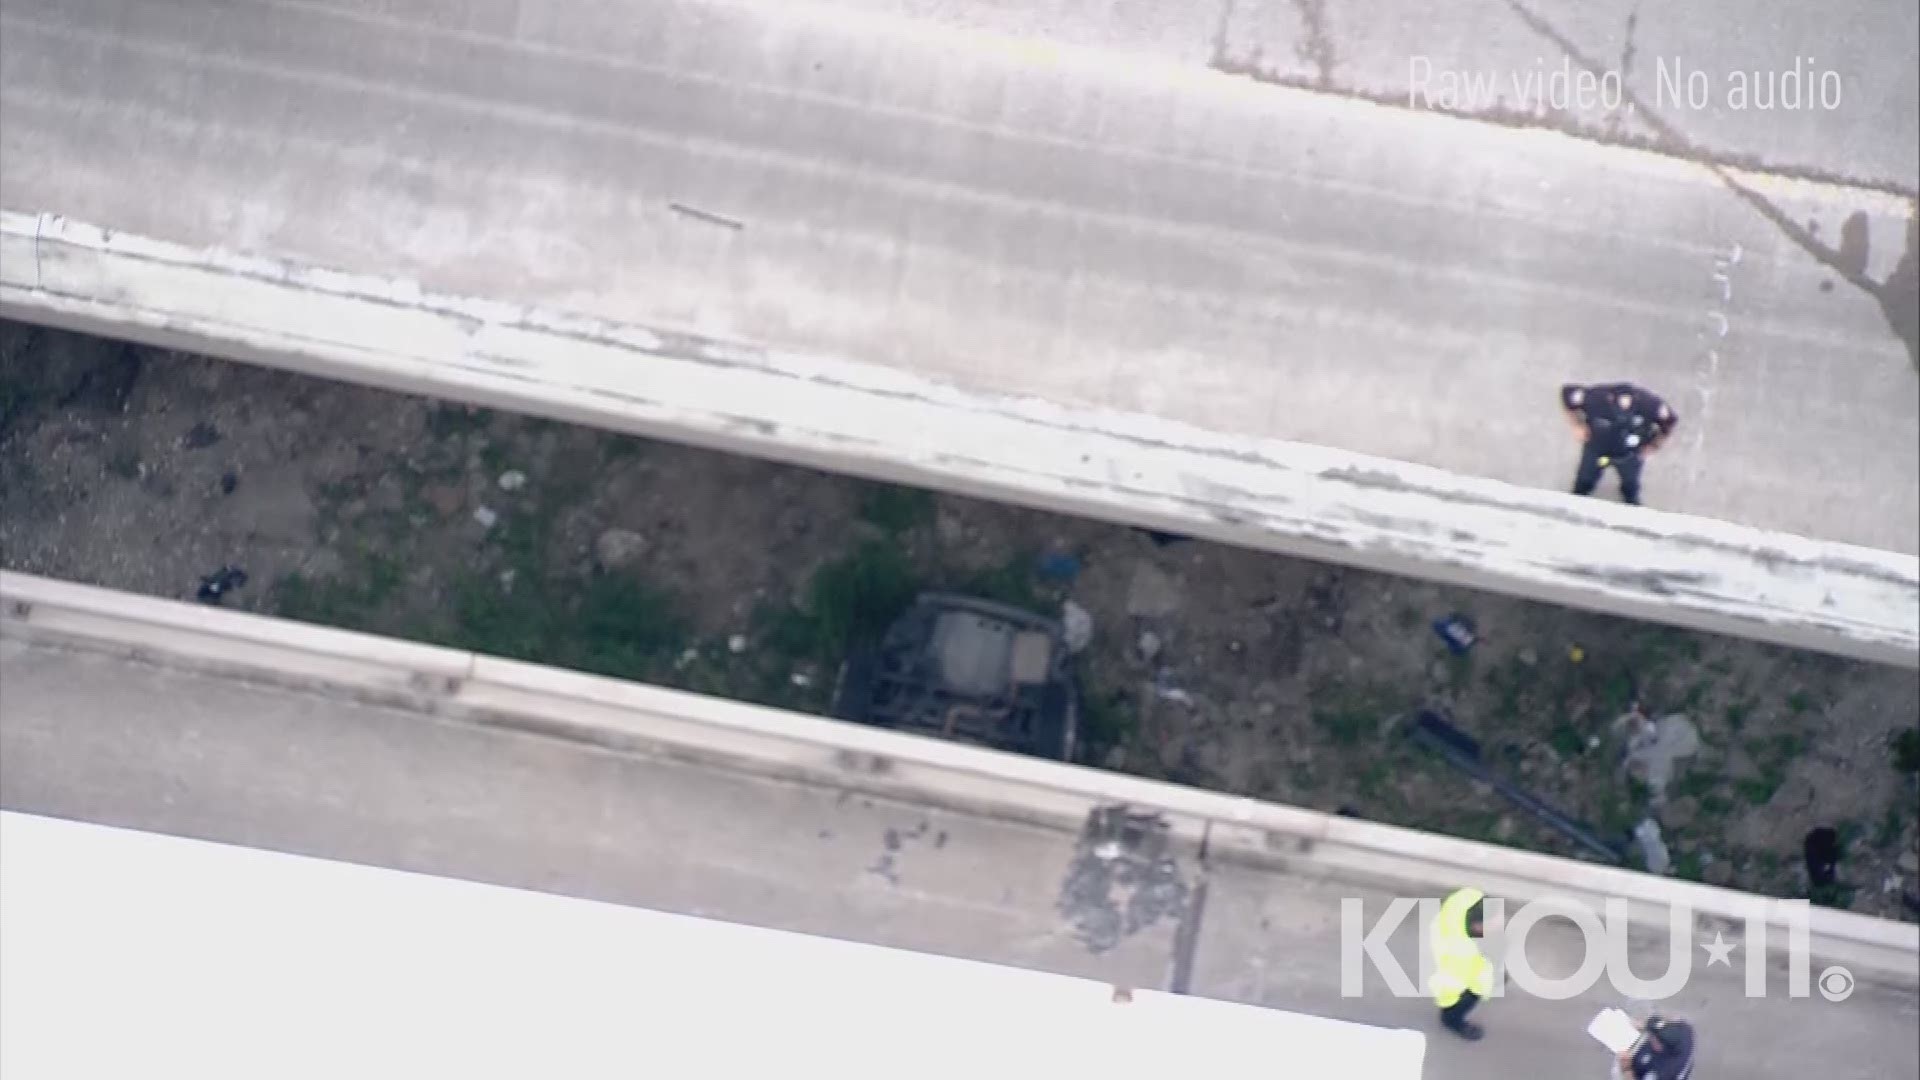 Video from Air 11 shows a car that fell off the bridge landed upside down on the embankment below. The sheriff's office says a child died in the incident. https://www.khou.com/article/traffic/hcso-4-year-old-dies-after-car-falls-off-i-10-bridge/285-1e4dec64-8daa-4c7a-905f-5b143d43833f